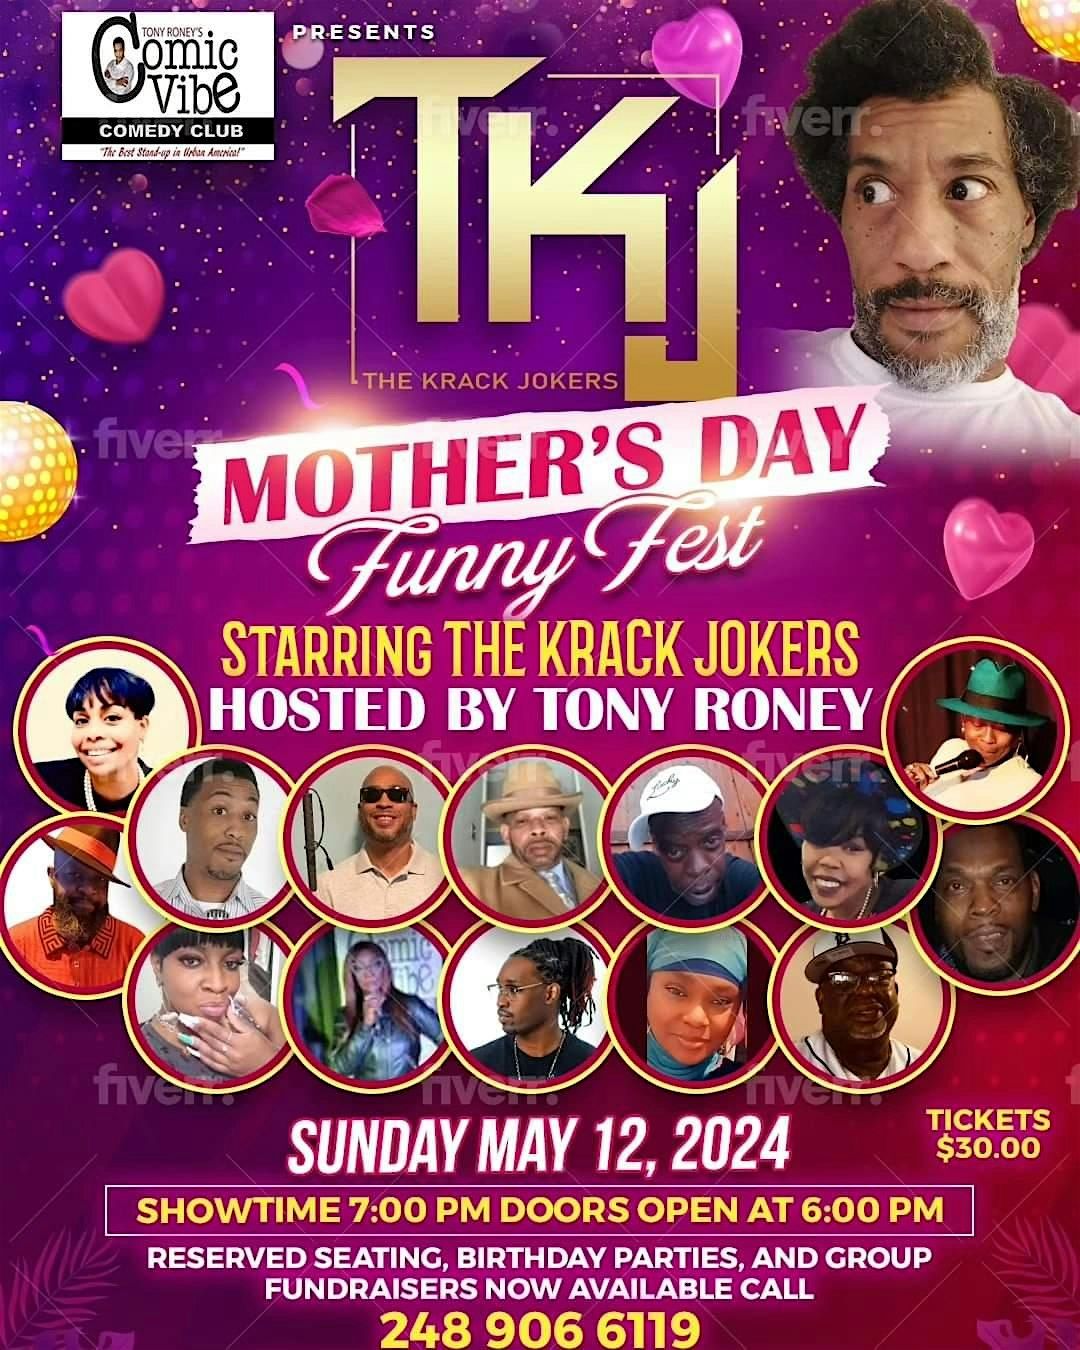 Copy of Mother's Day Funny Fest